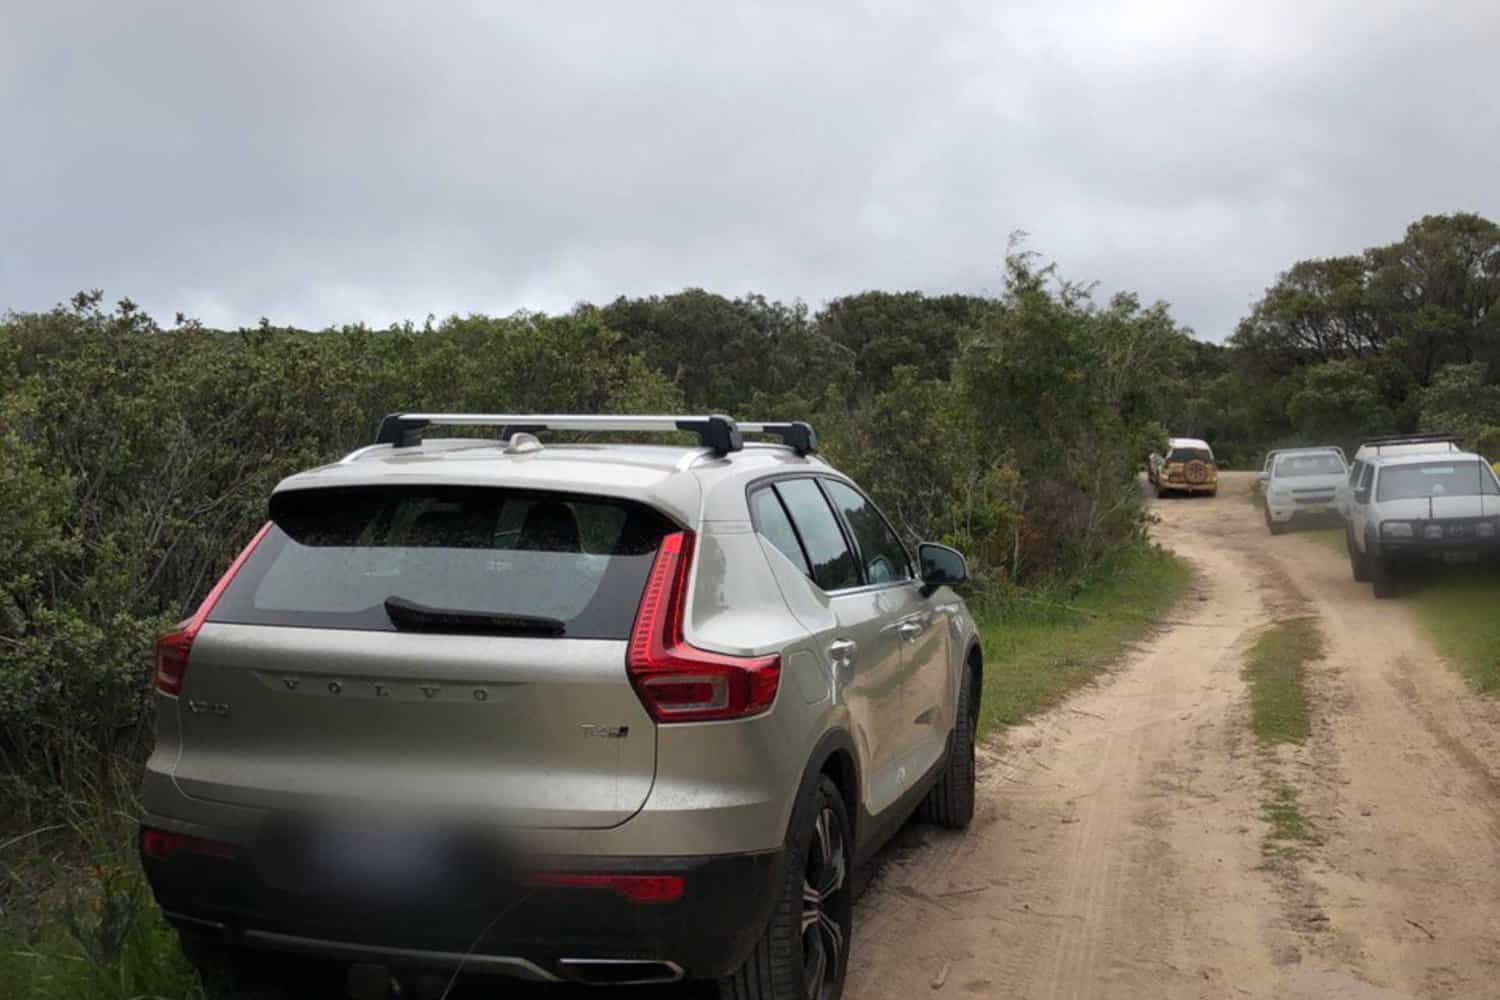 A line of vehicles, led by a silver Volvo XC40, navigates a narrow dirt road surrounded by dense green shrubbery under an overcast sky. The focus is on the Volvo's rear, highlighting its modern design and the rugged, natural setting of an outdoor trail.